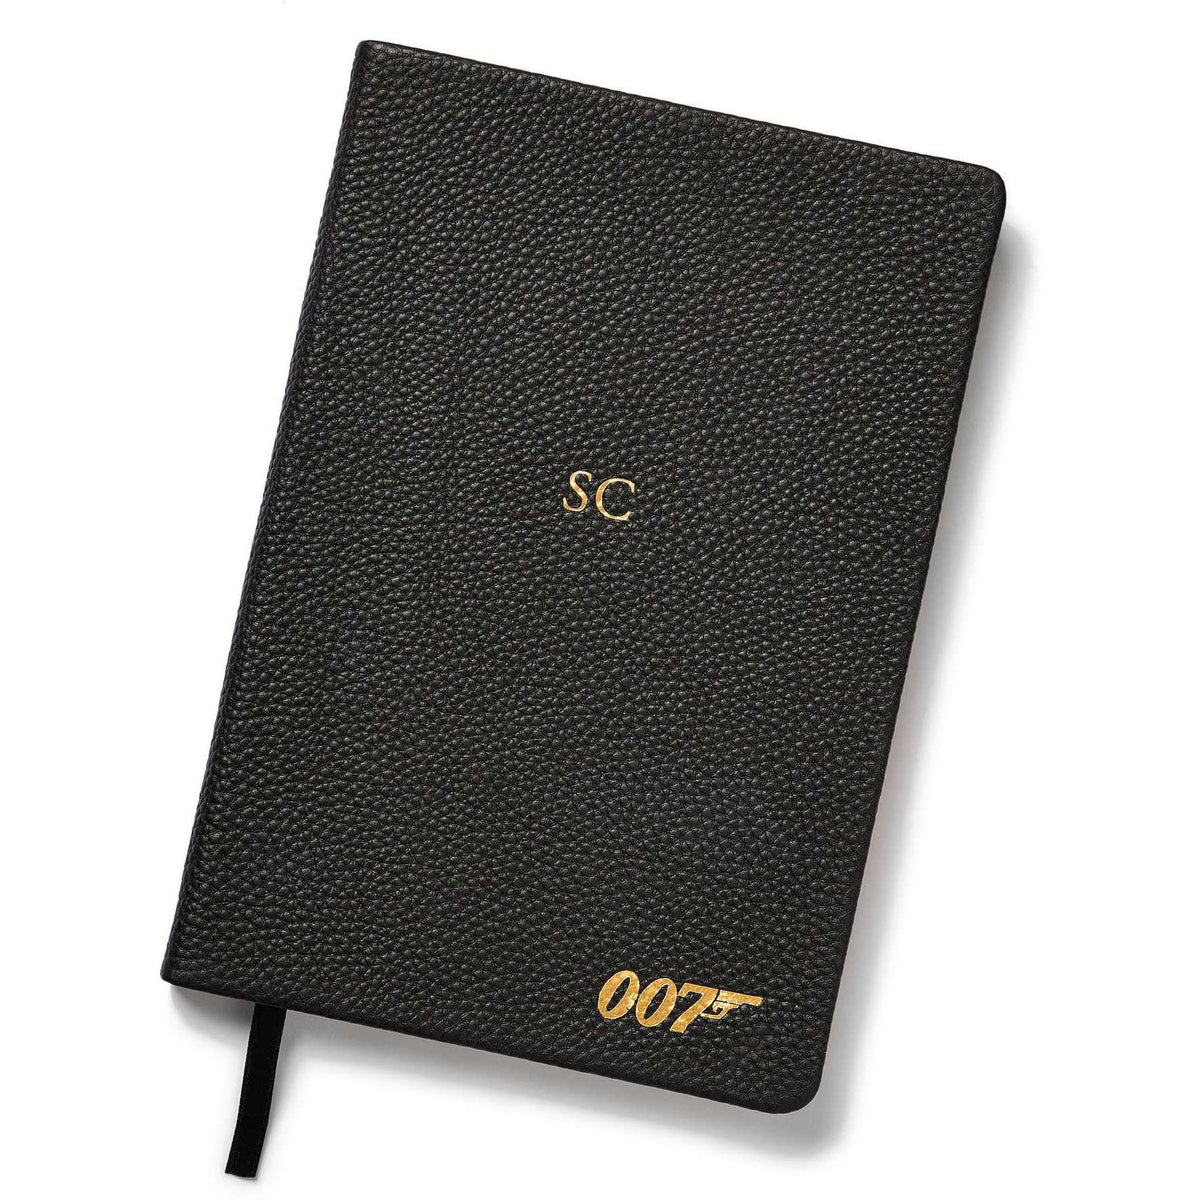 007 Personalised Pebble-grain Leather Notebook (A5) STATIONERY Plinth 